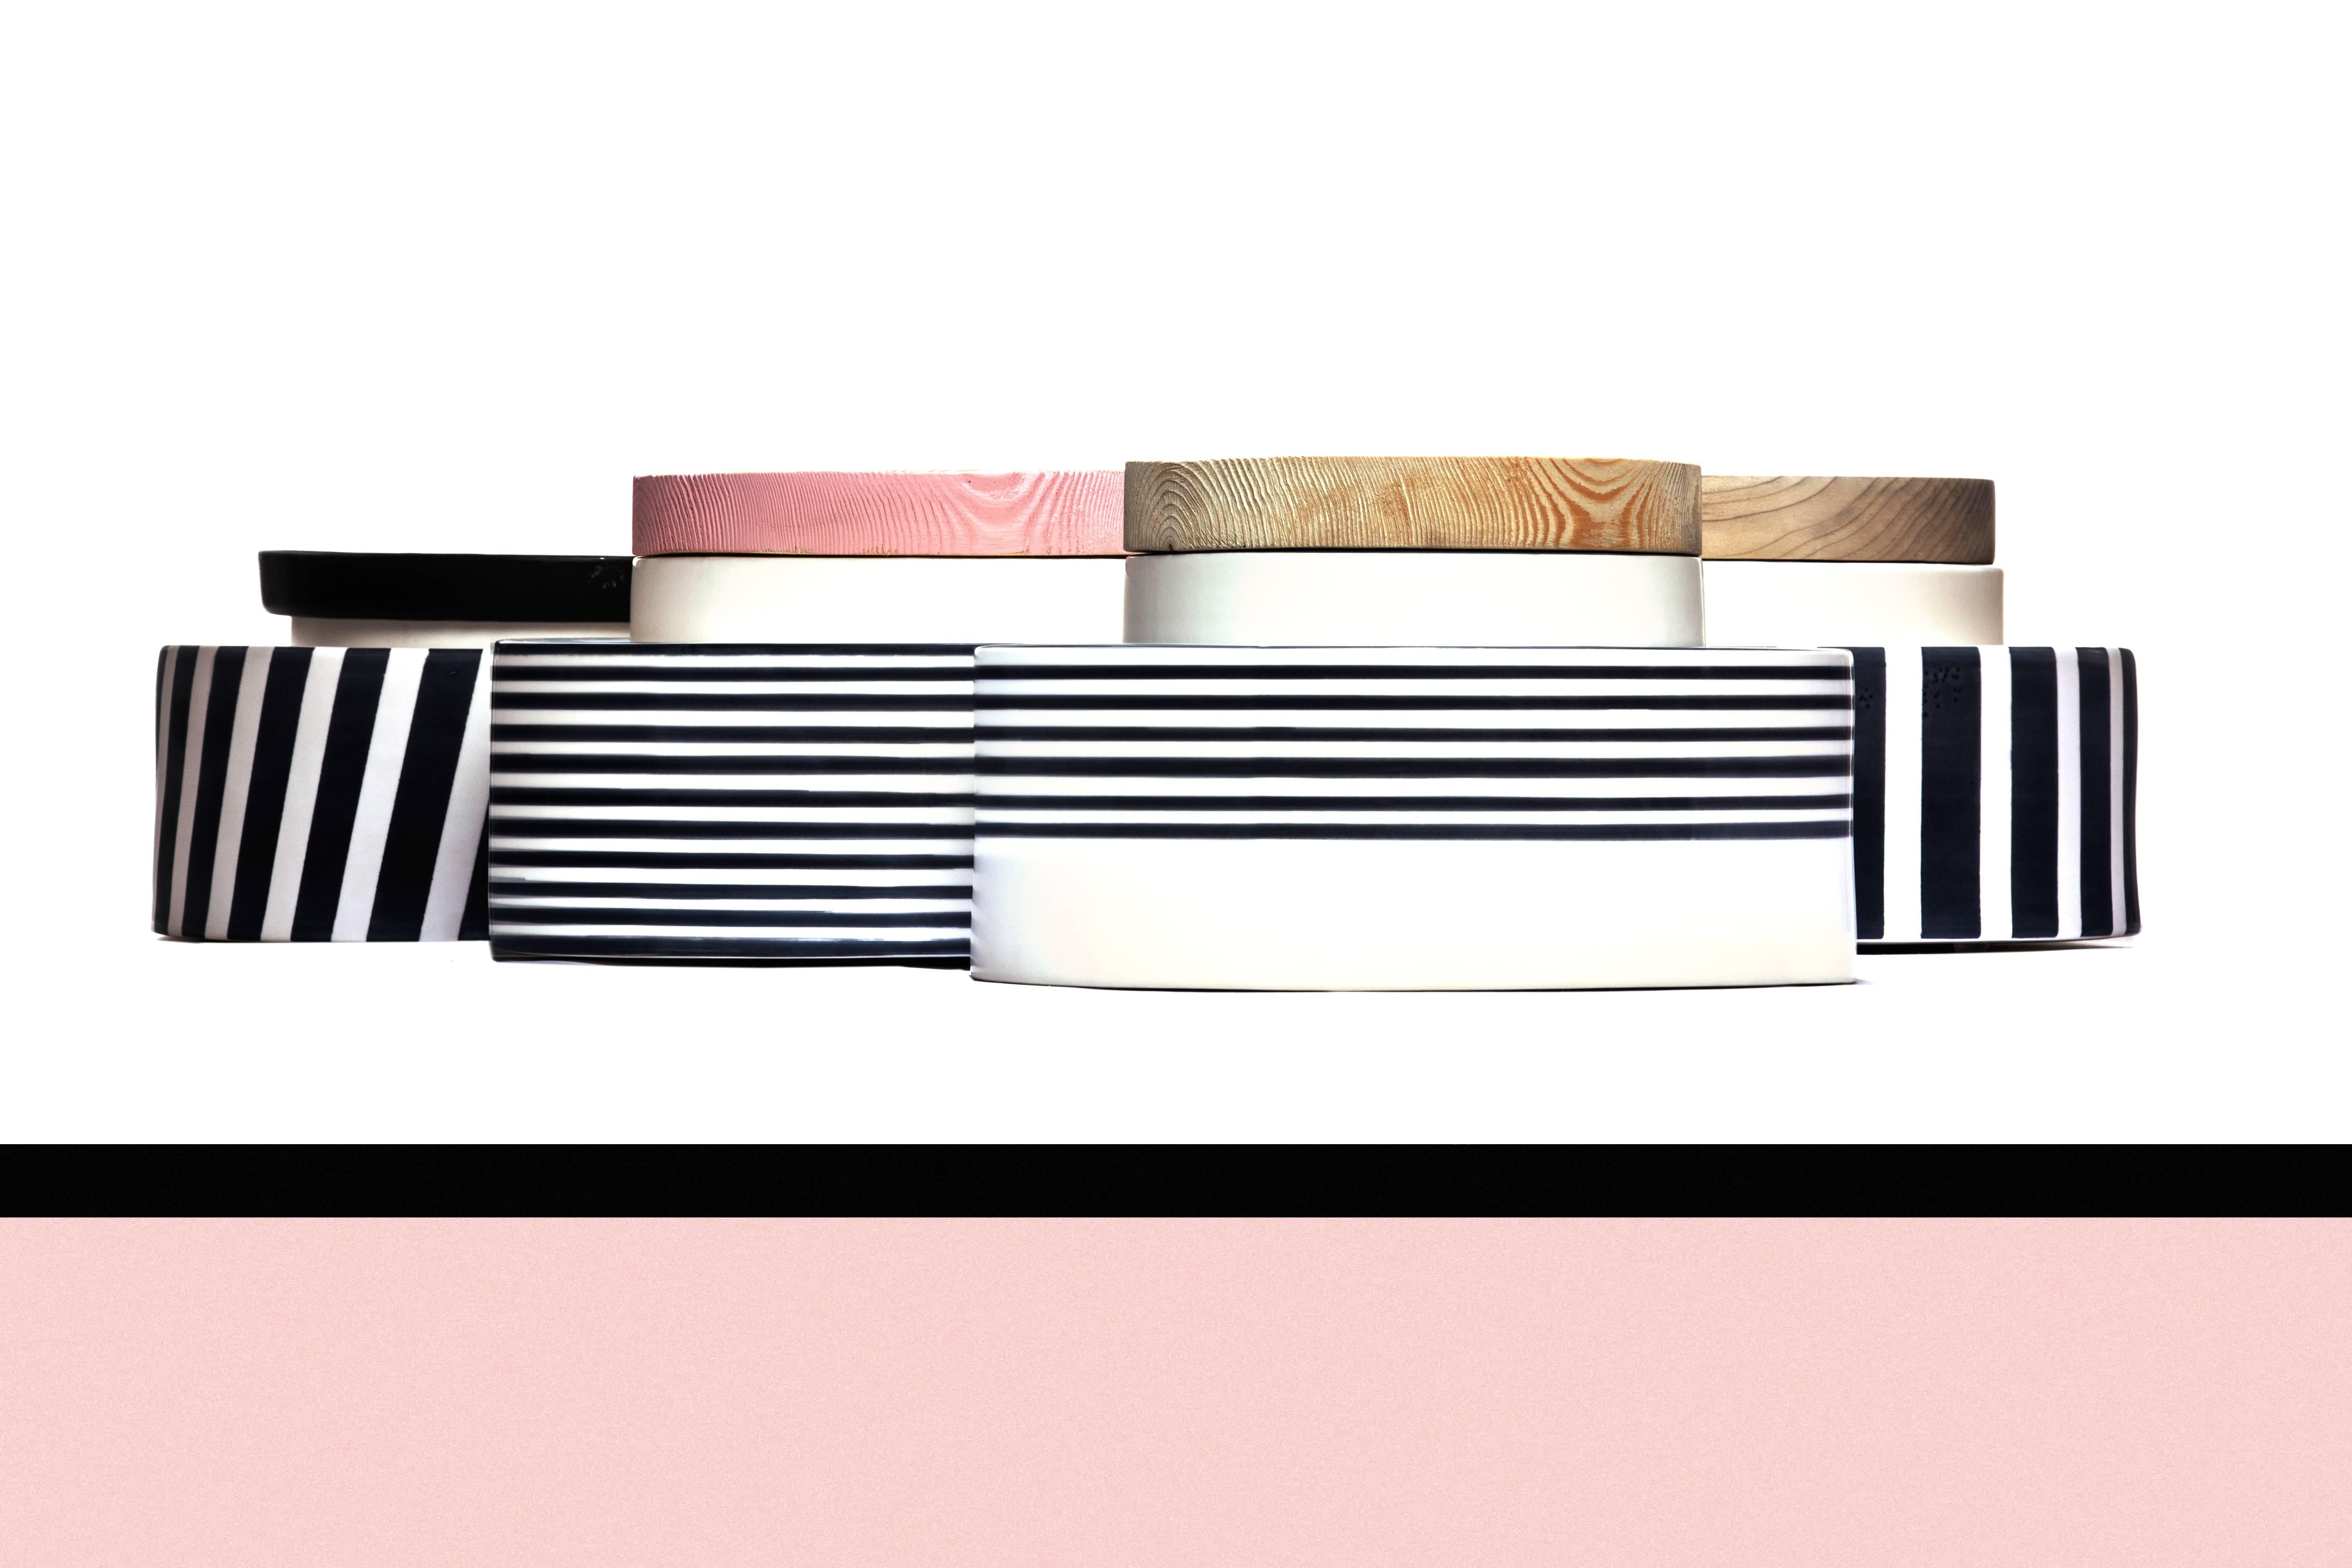 Silos pink and stripes designed by Simona Cardinetti 

Handmade in Italy

Materials: Ceramic, wood.
 